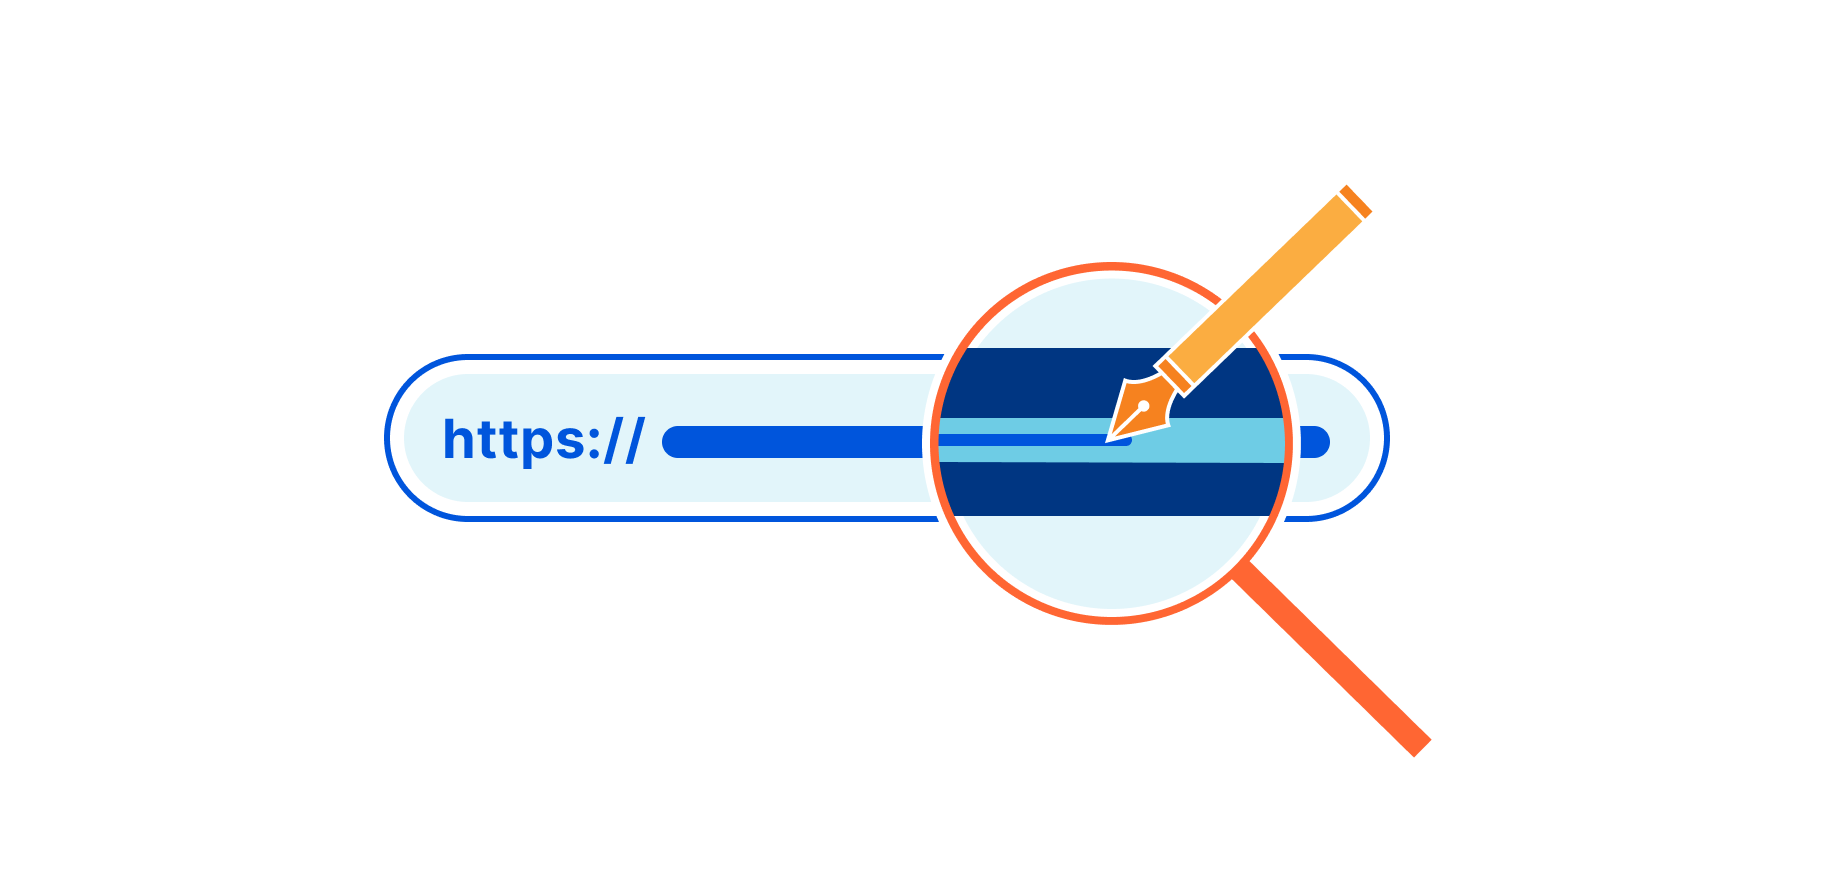 Dynamic URL Rewriting at the edge with Cloudflare